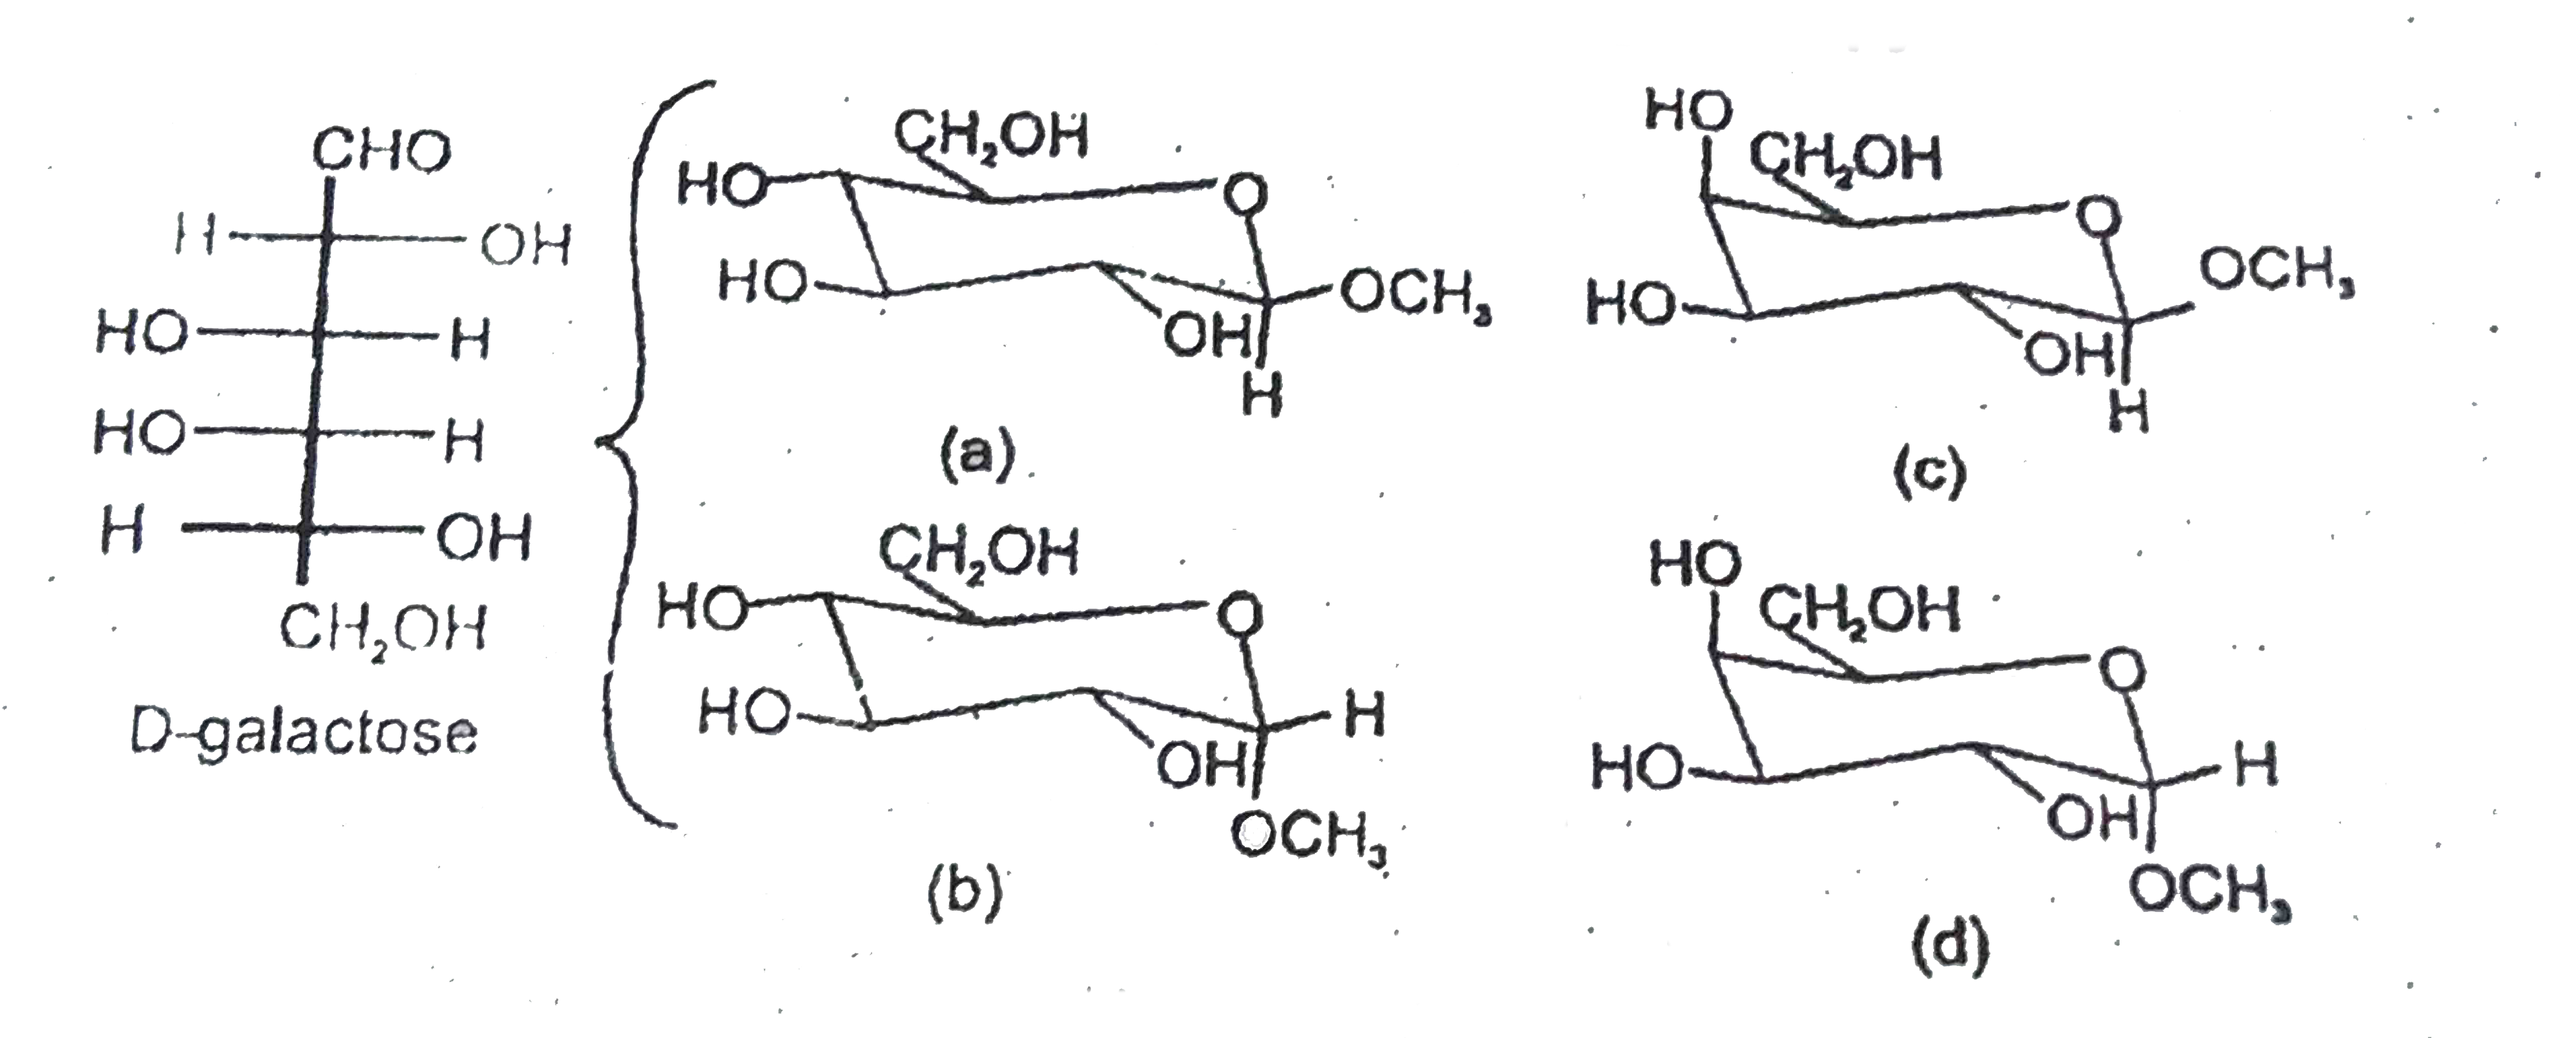 Which of the structure represent methyl alpha -D- galactopyranoside ?